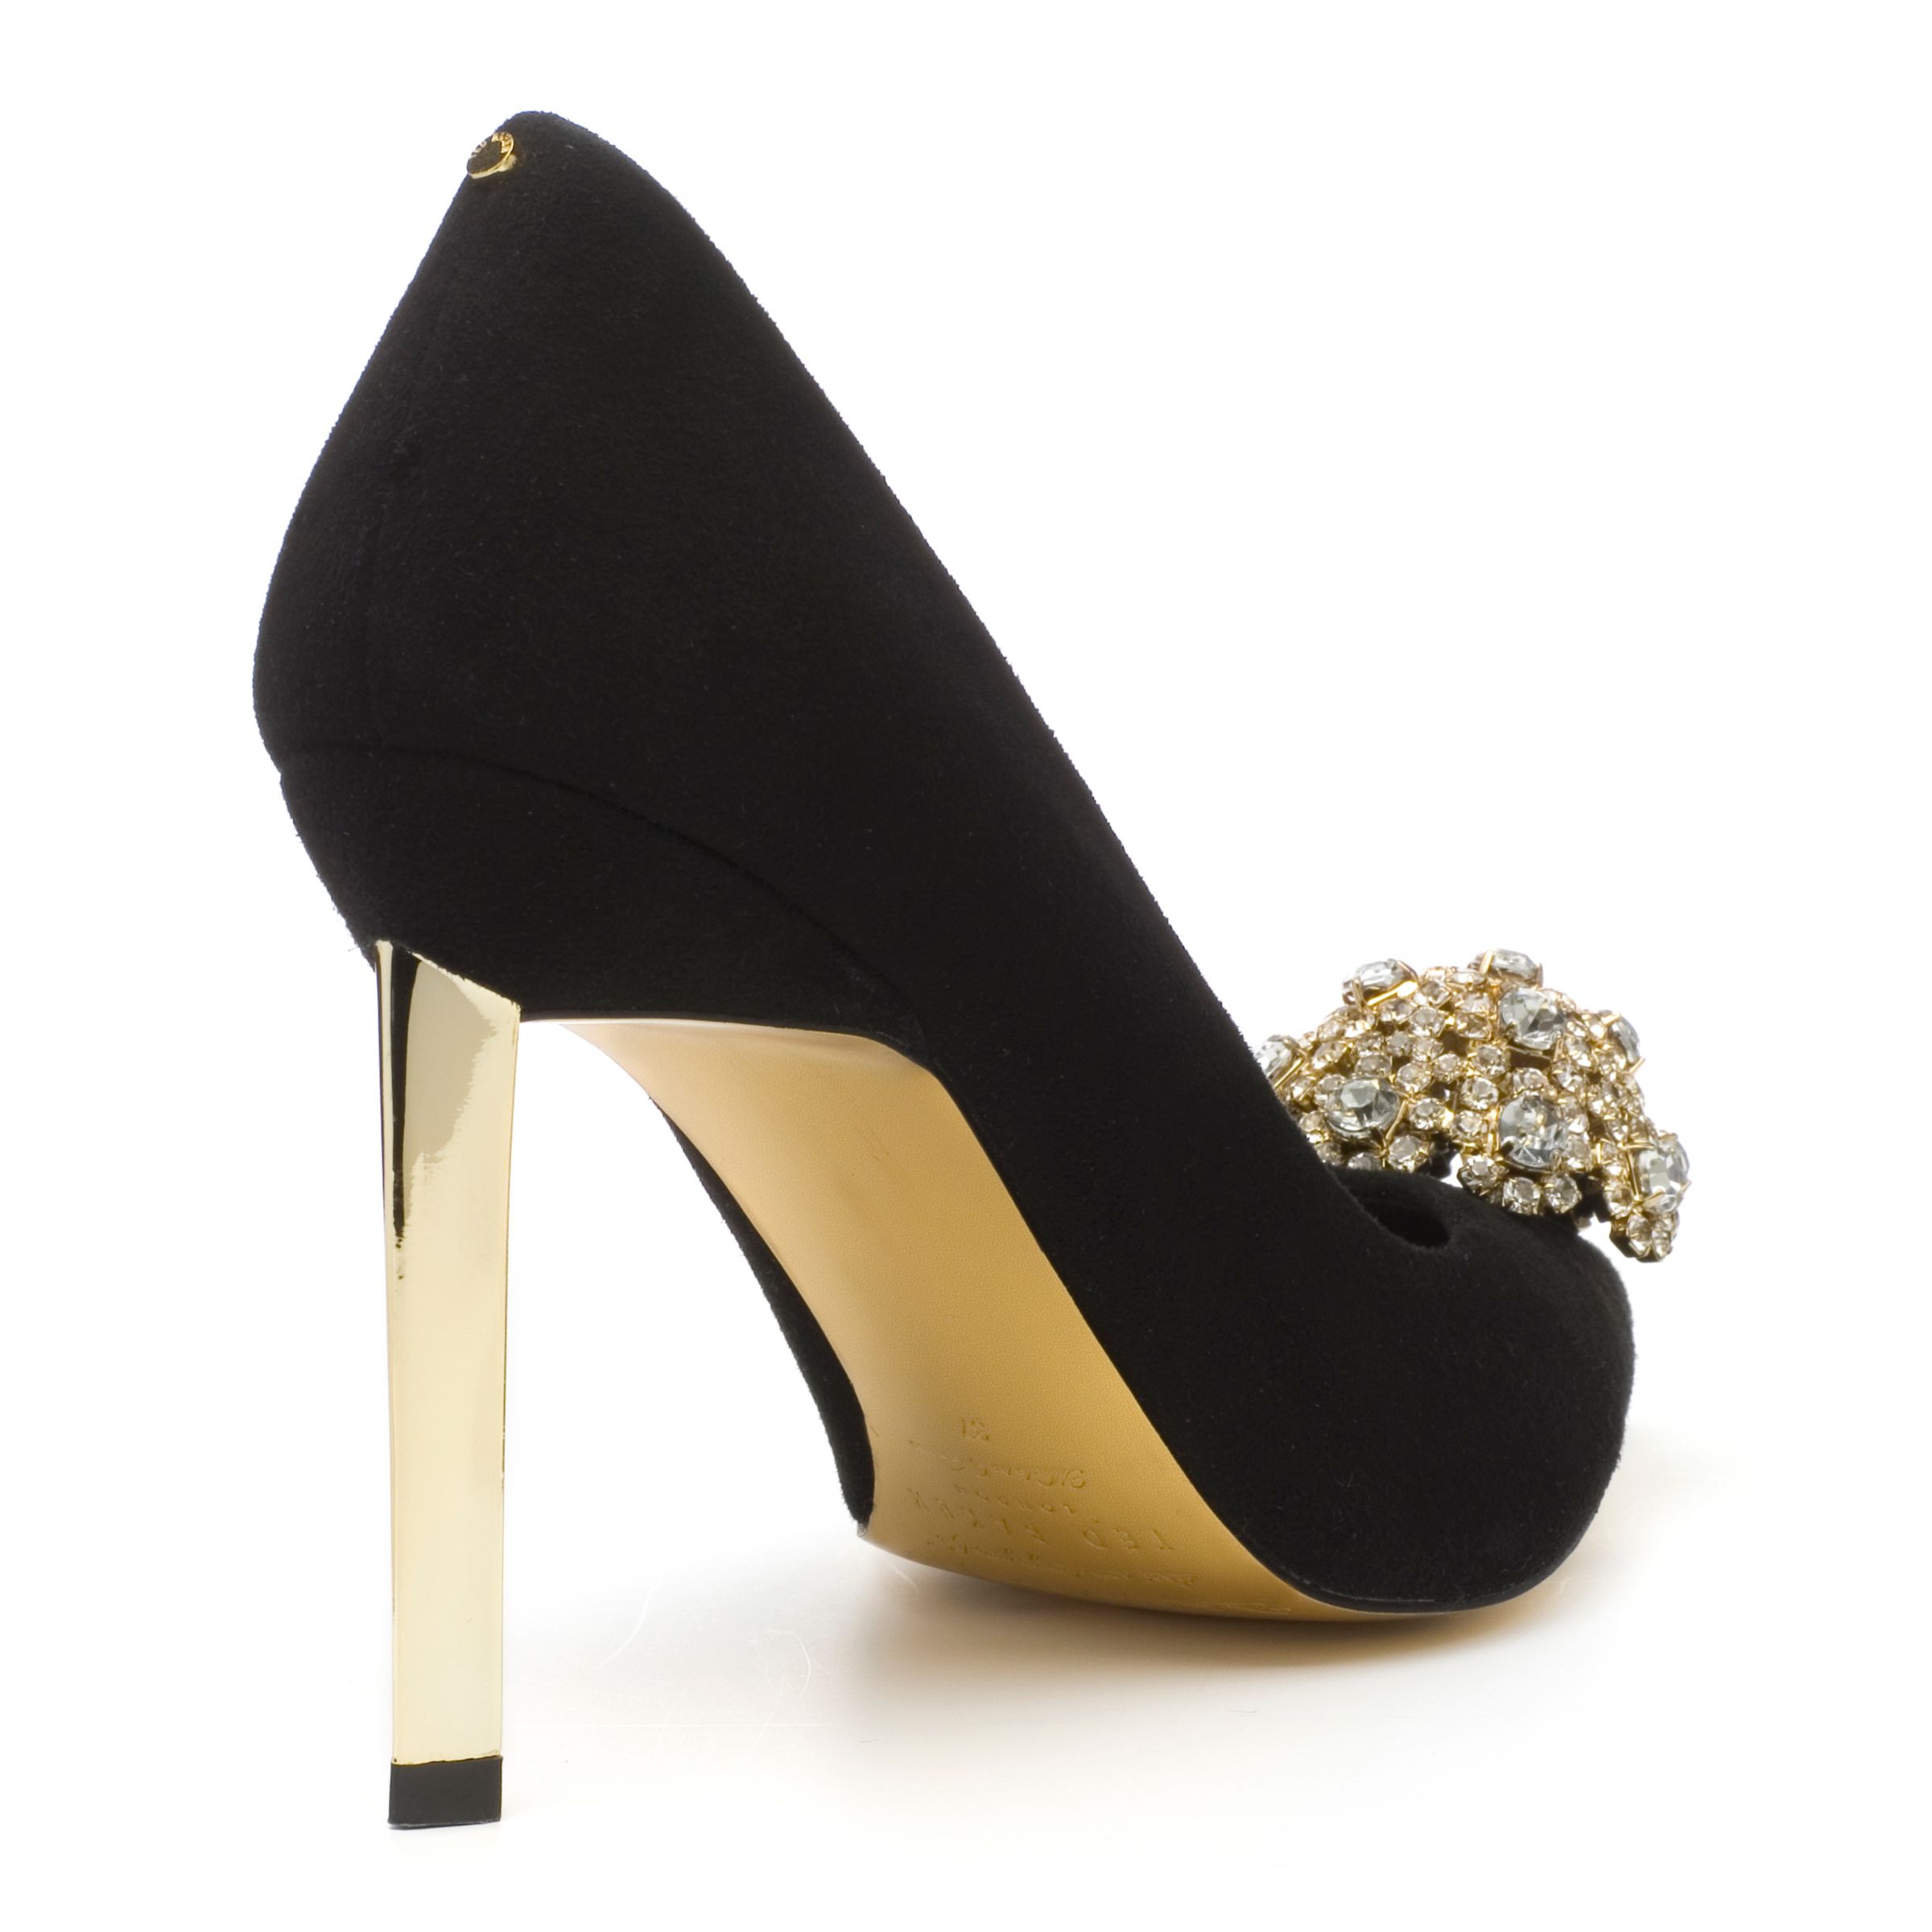 Ted Baker Tie the Knot Peetch Court Shoes